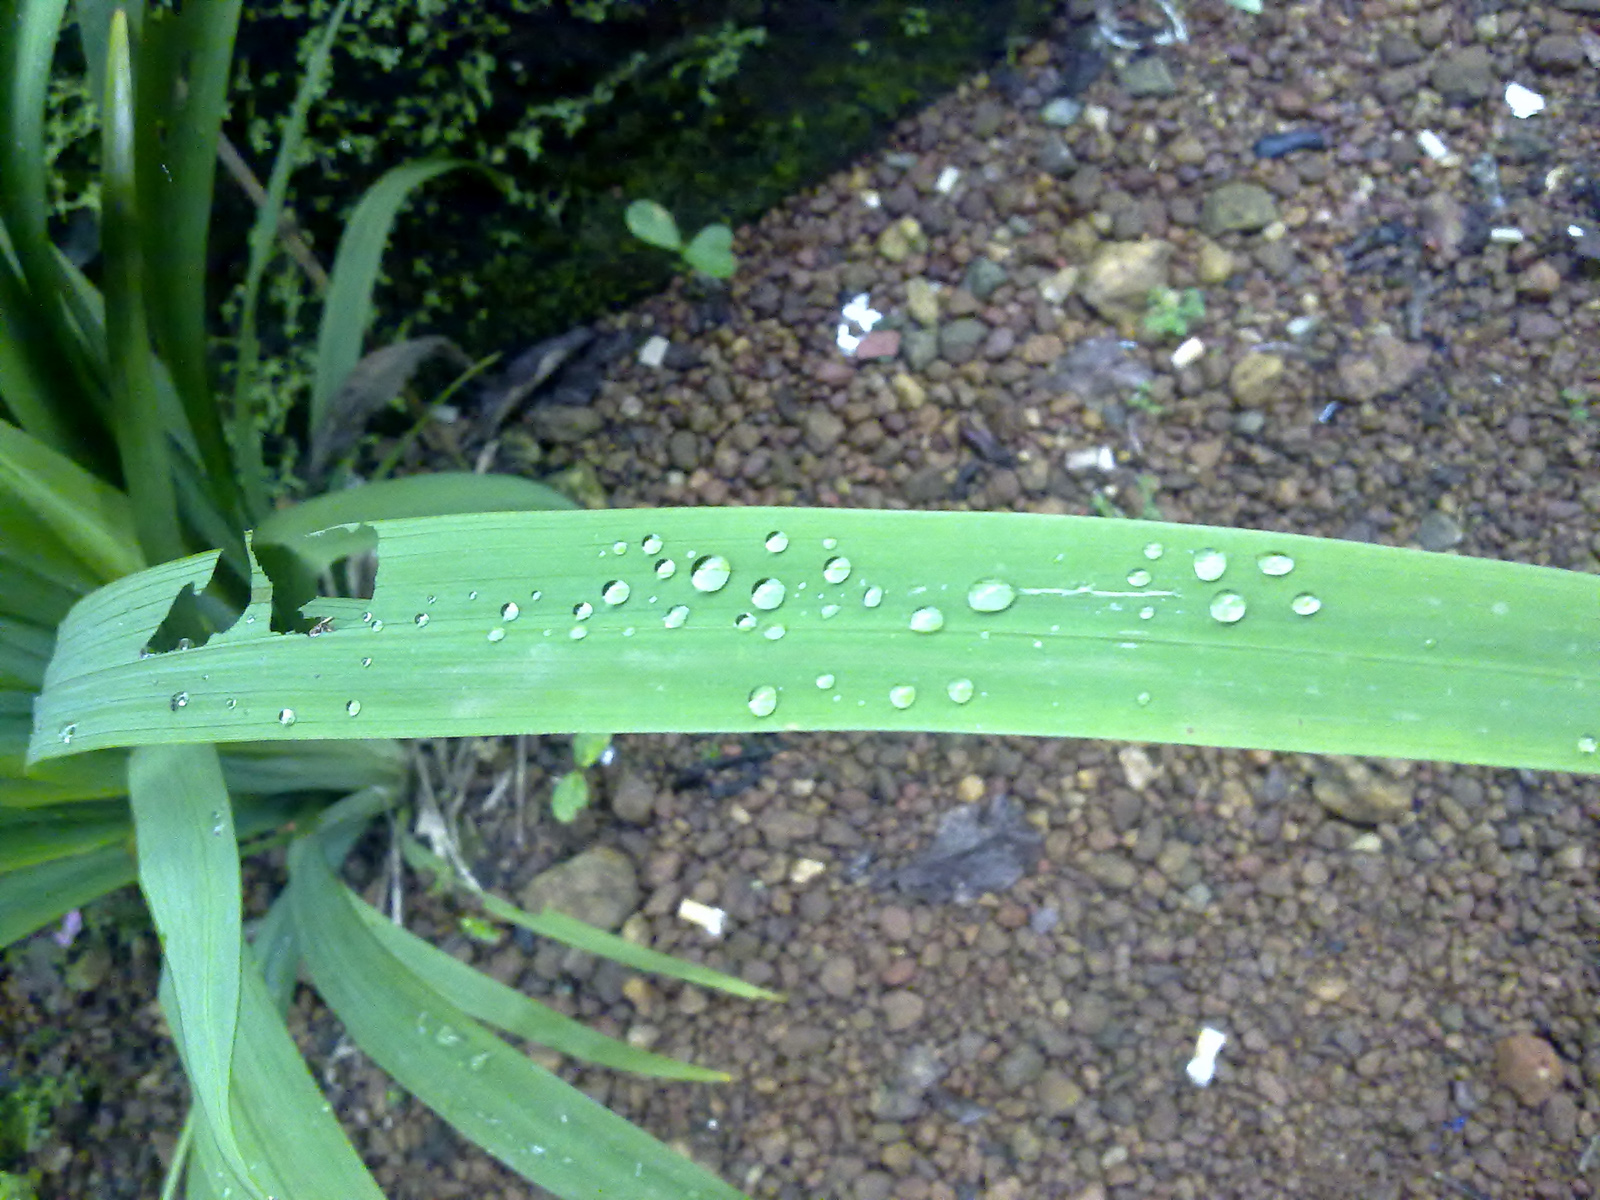 Water drops on green leaf photo